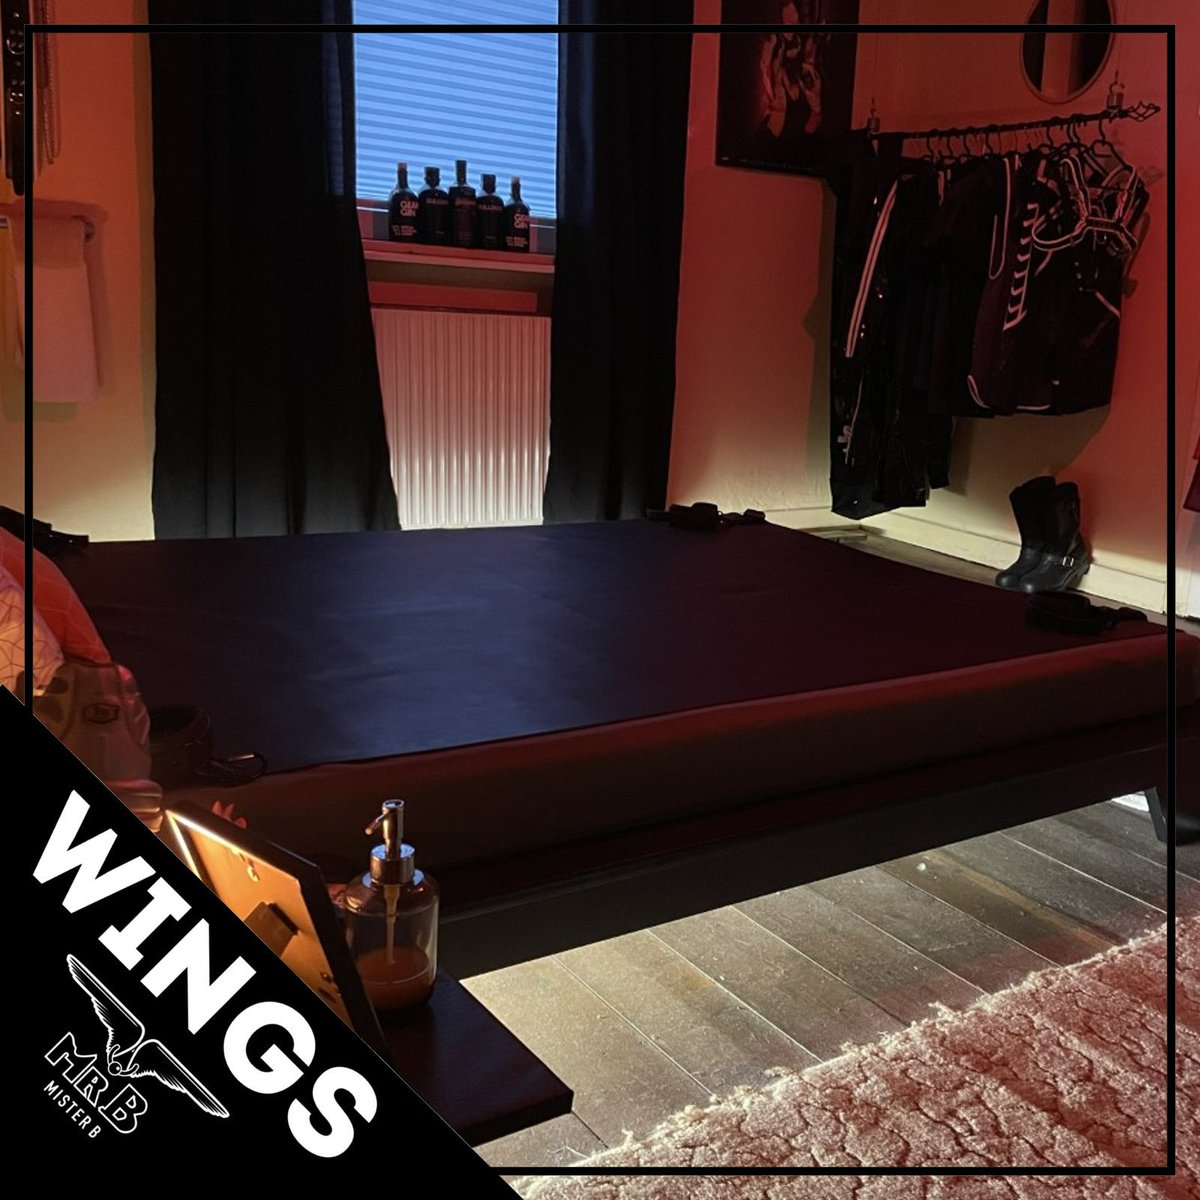 test Twitter Media - Playrooms and Dungeons 
WINGS asked you all to show us your play area, your kinky bedroom or your tool-filled dungeon and show off where you get down and get off

Check it out in WINGS 🤓Link in Bio🤓

@BLUEBEAGLEPUP
@SNEAXPUPPY
@DUFT_PUNK3
@FFUNGAY94
@DIVIDEBY_ZERO_ https://t.co/KGNGkapLaC